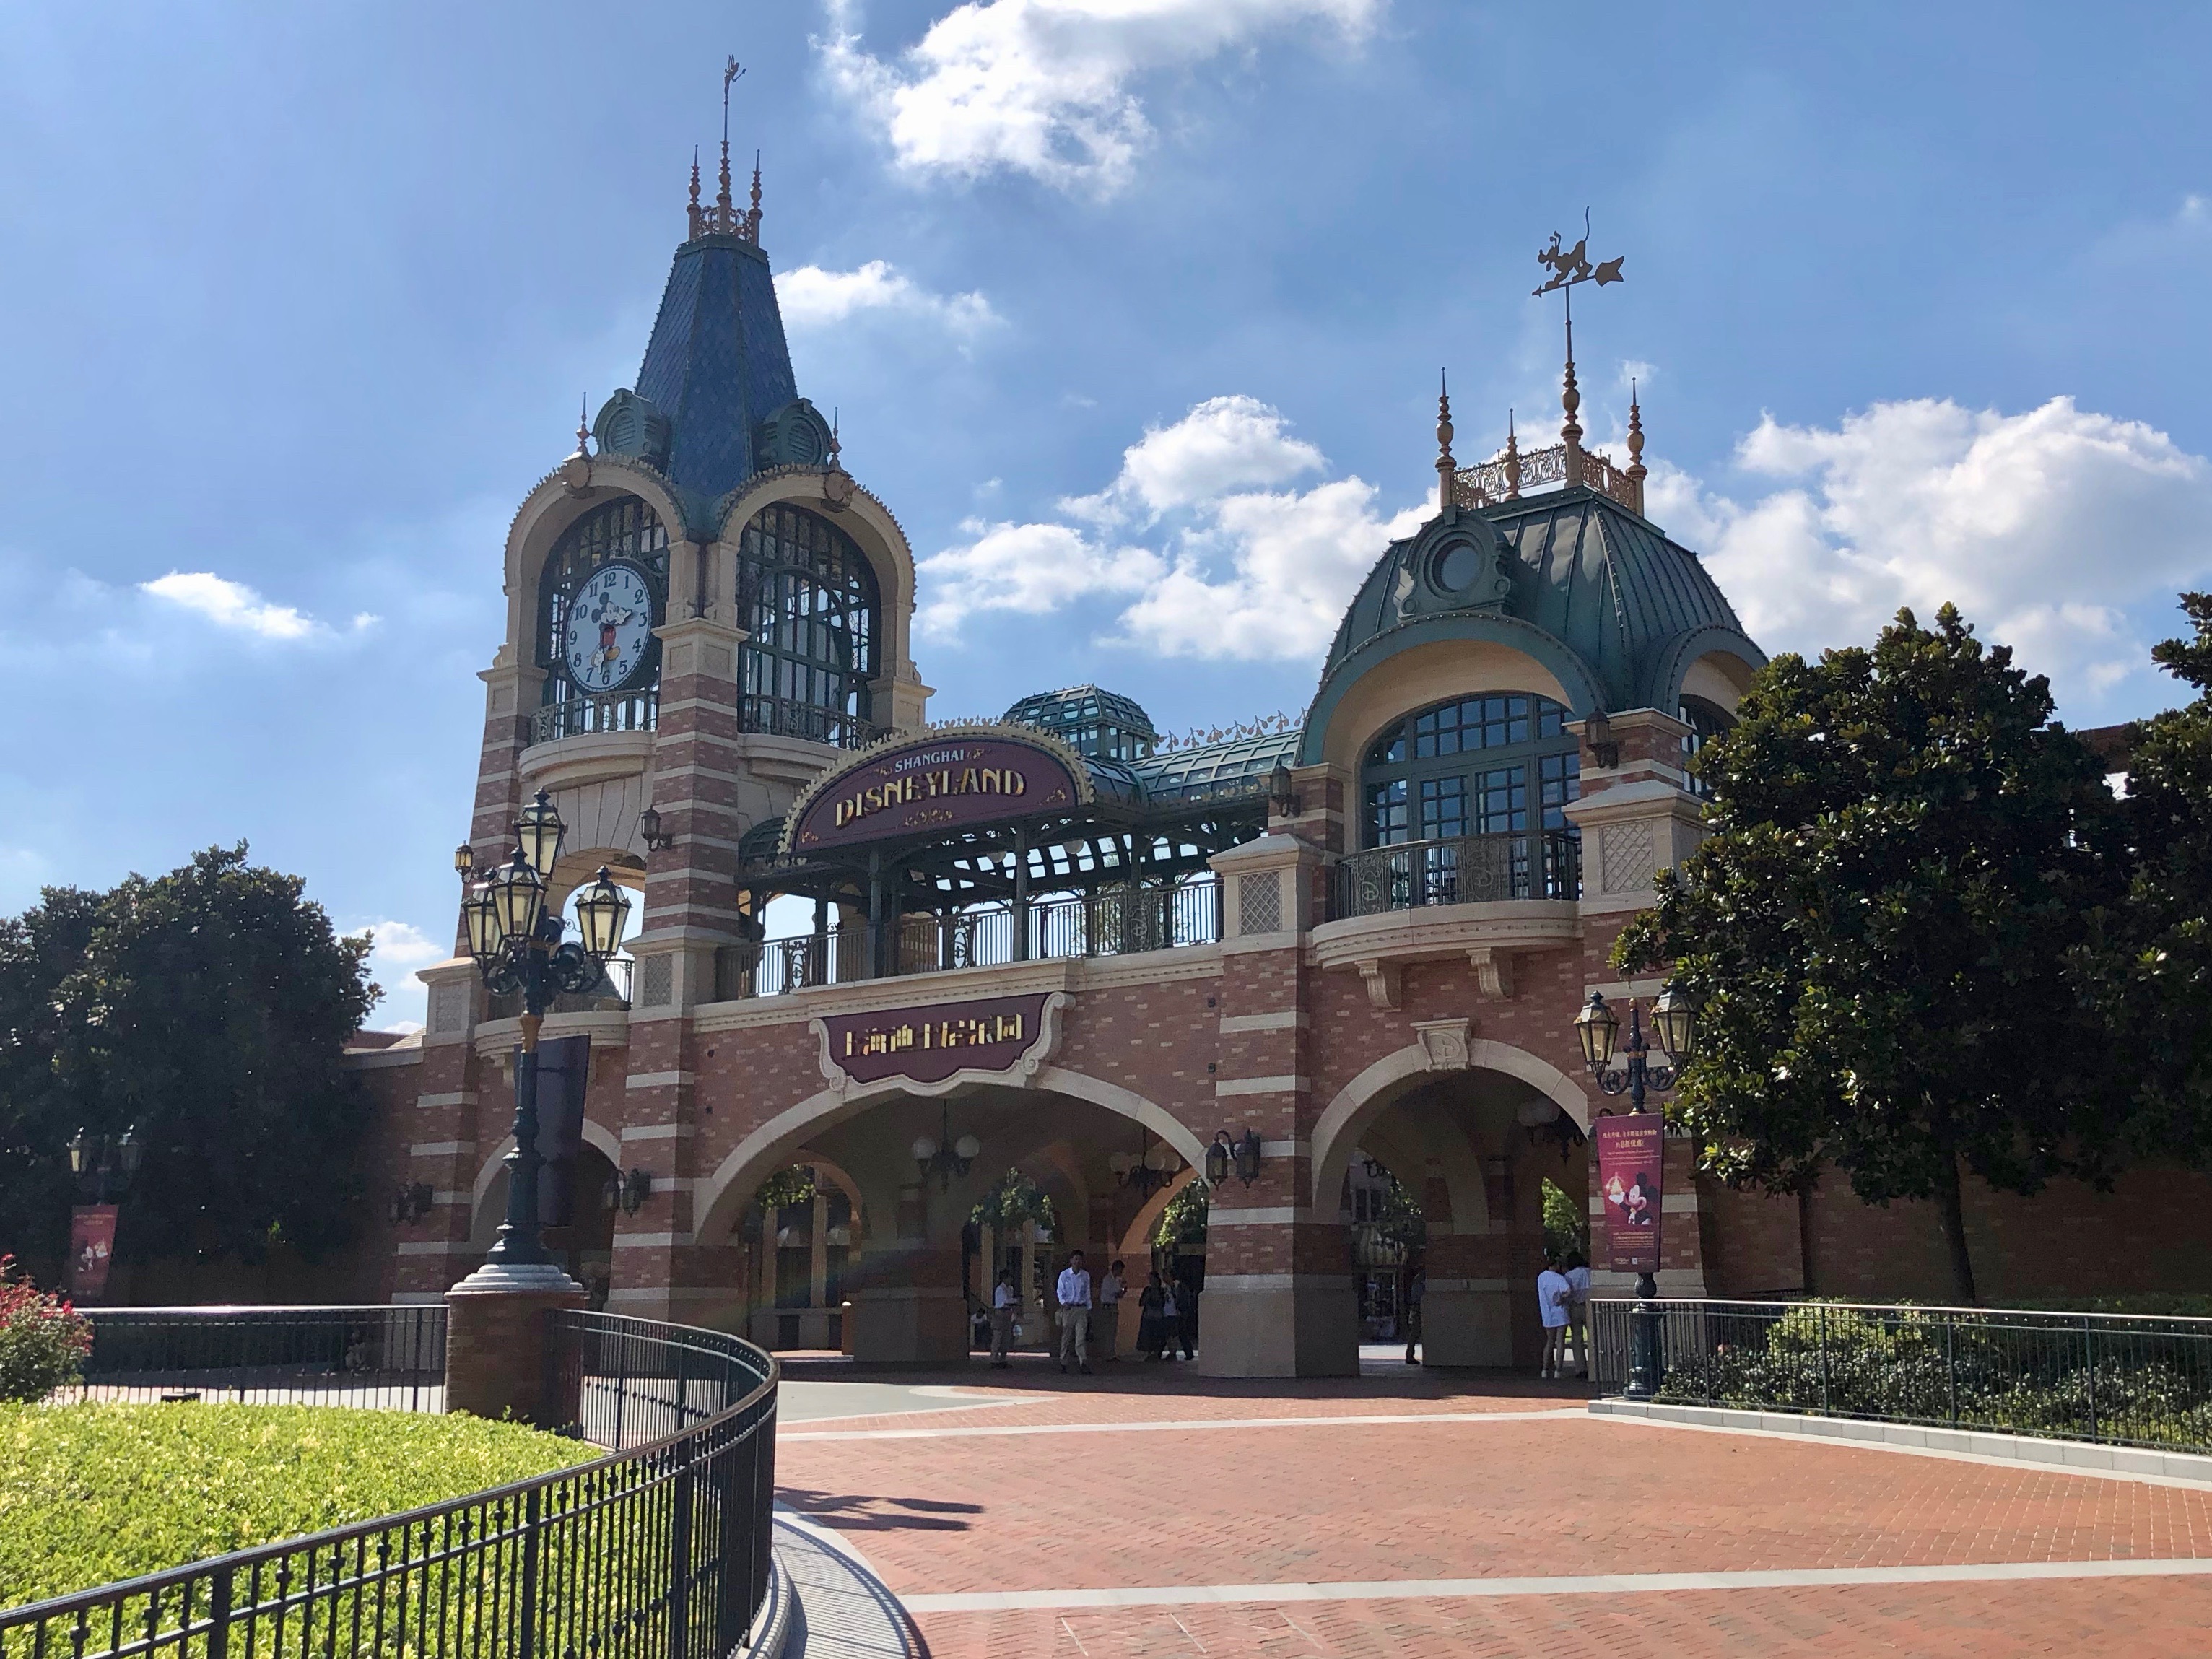 This building takes the place of the train stations in other Disneyland parks. Notice the Mickey Mouse clock on the tower.